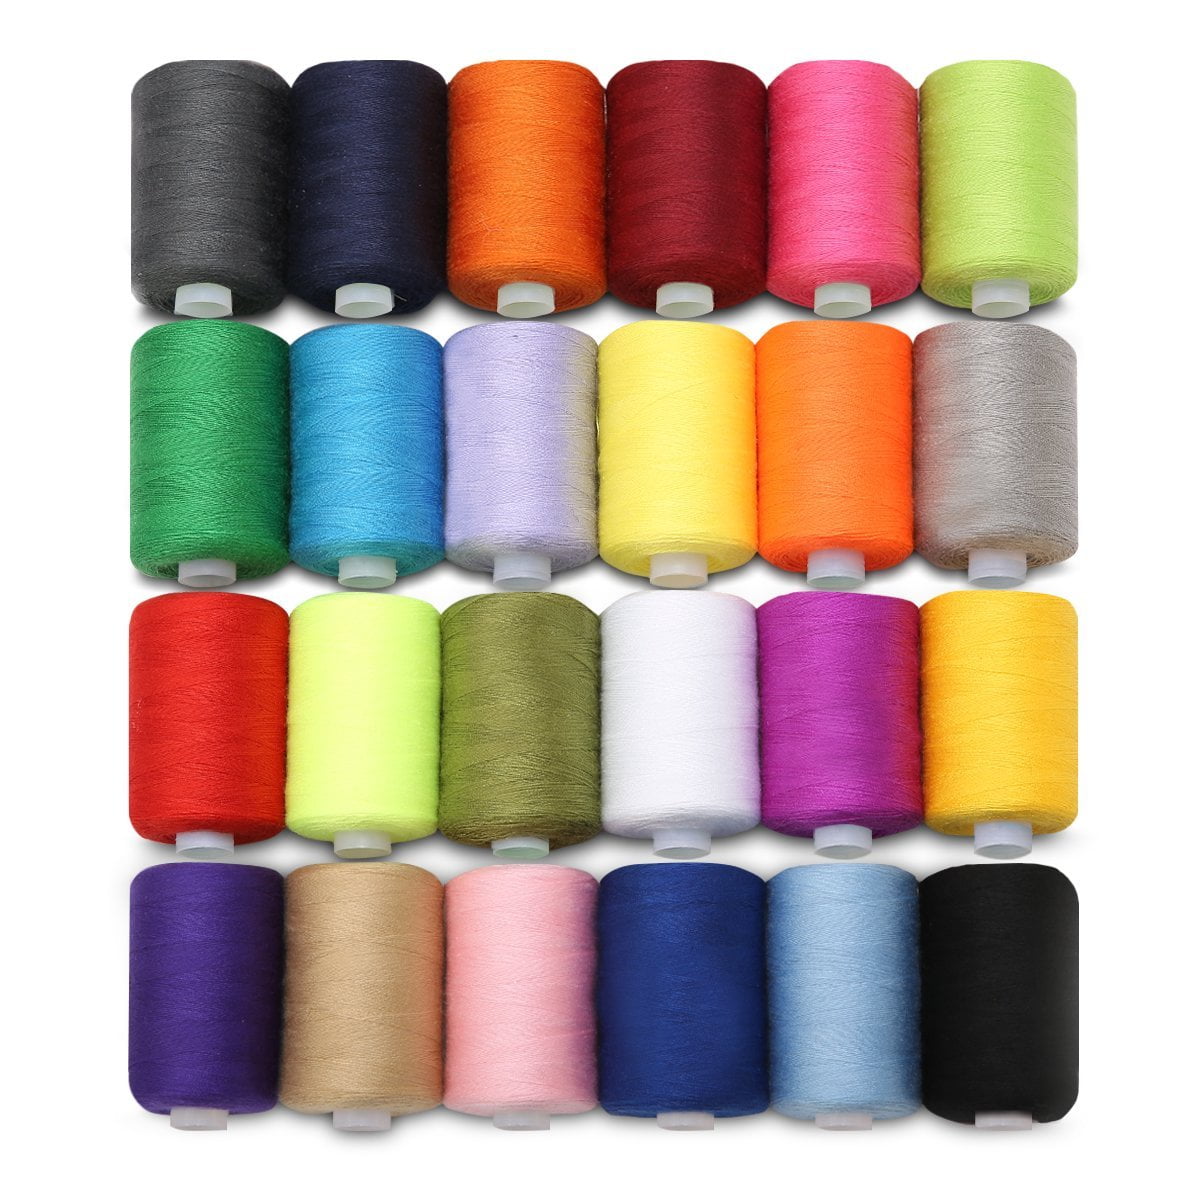 24 Colors Sewing Machine Thread Hand Stitching Thread 300 Yard 100%  Polyester Sewing Threads Quilting All Purpose For - Sewing Threads -  AliExpress